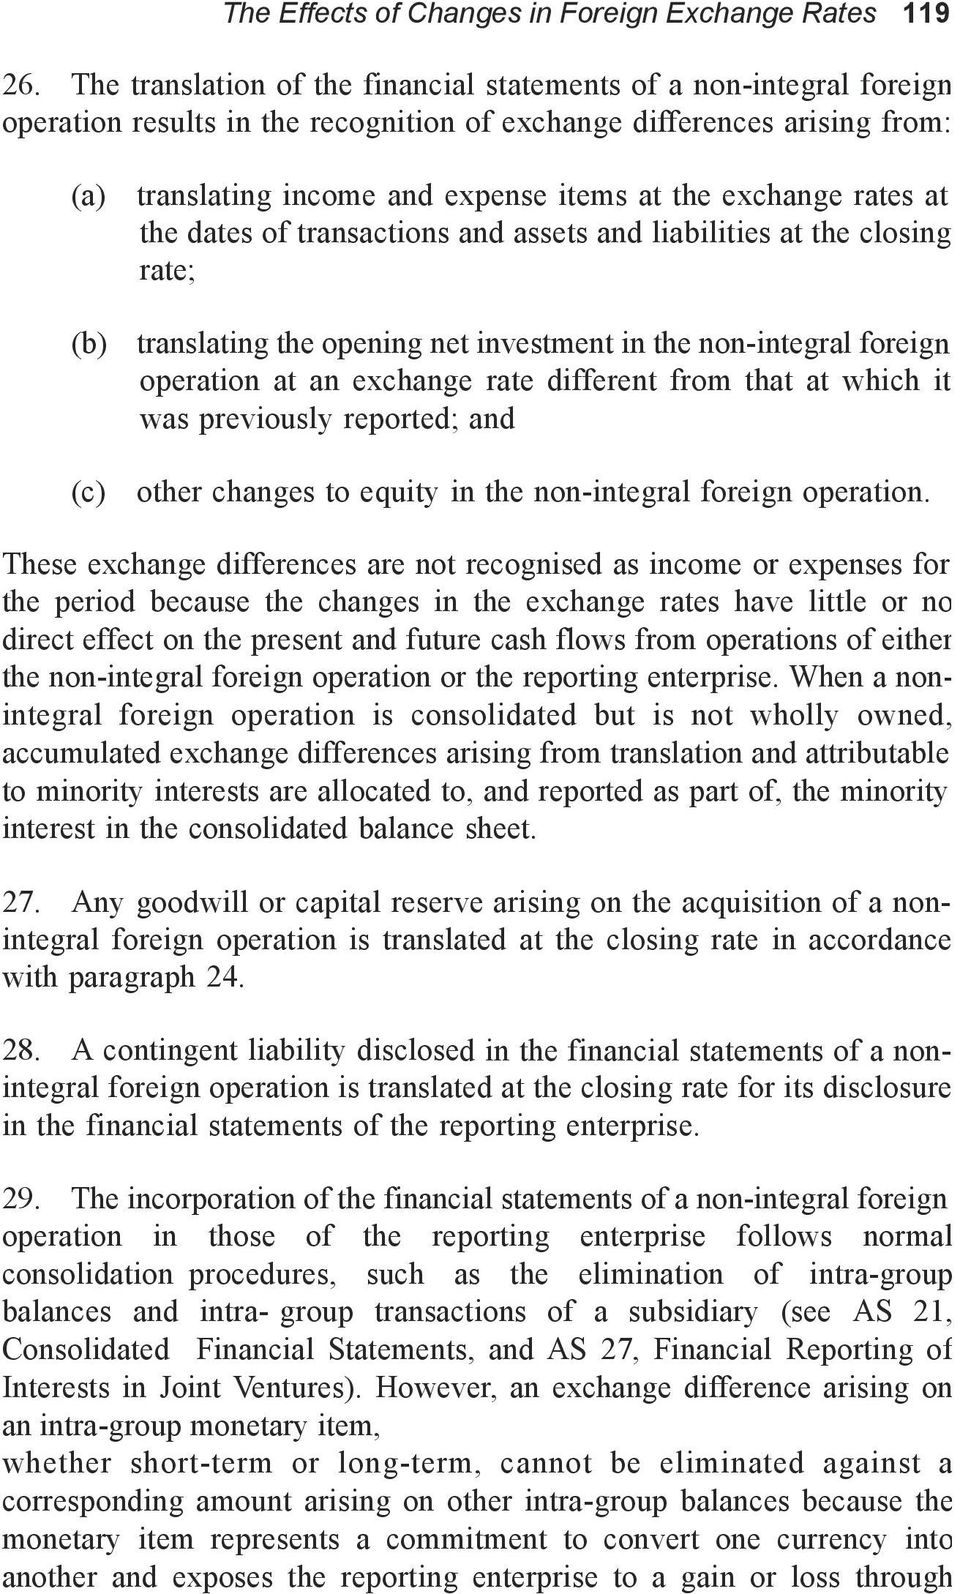 exchange rates at the dates of transactions and assets and liabilities at the closing rate; (b) translating the opening net investment in the non-integral foreign operation at an exchange rate